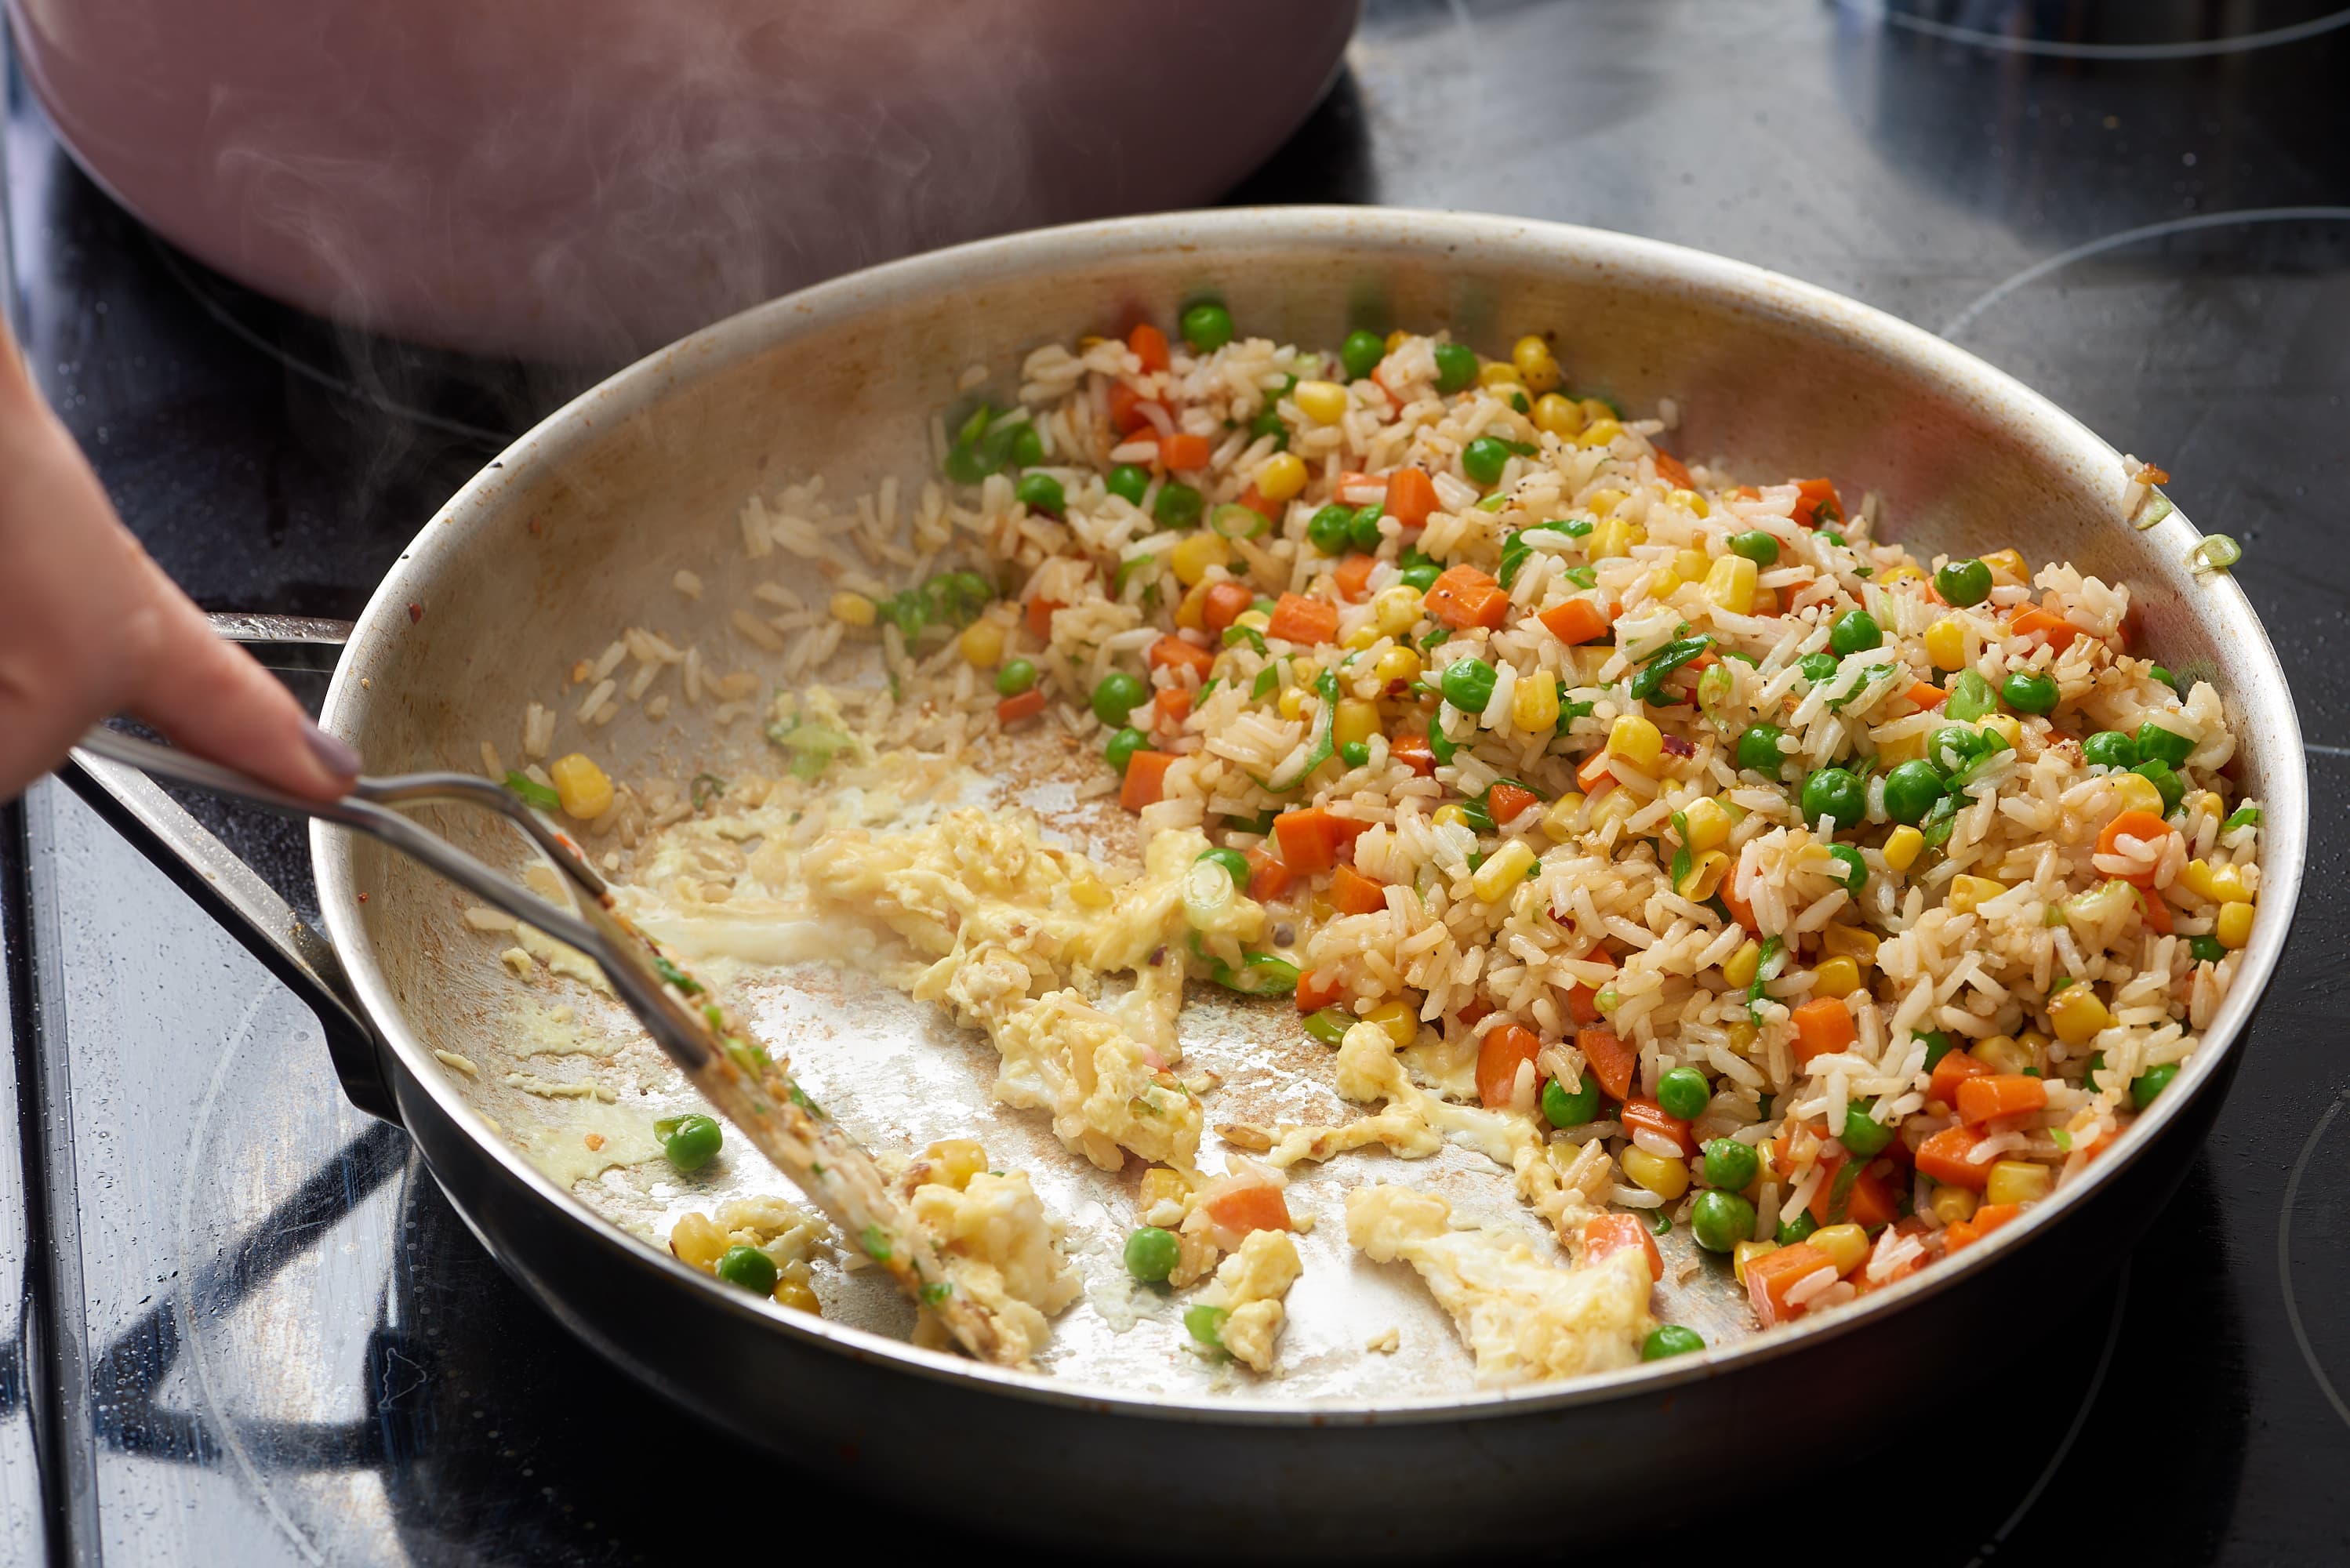 Chicken and Fried Rice in the OXO : r/carbonsteel